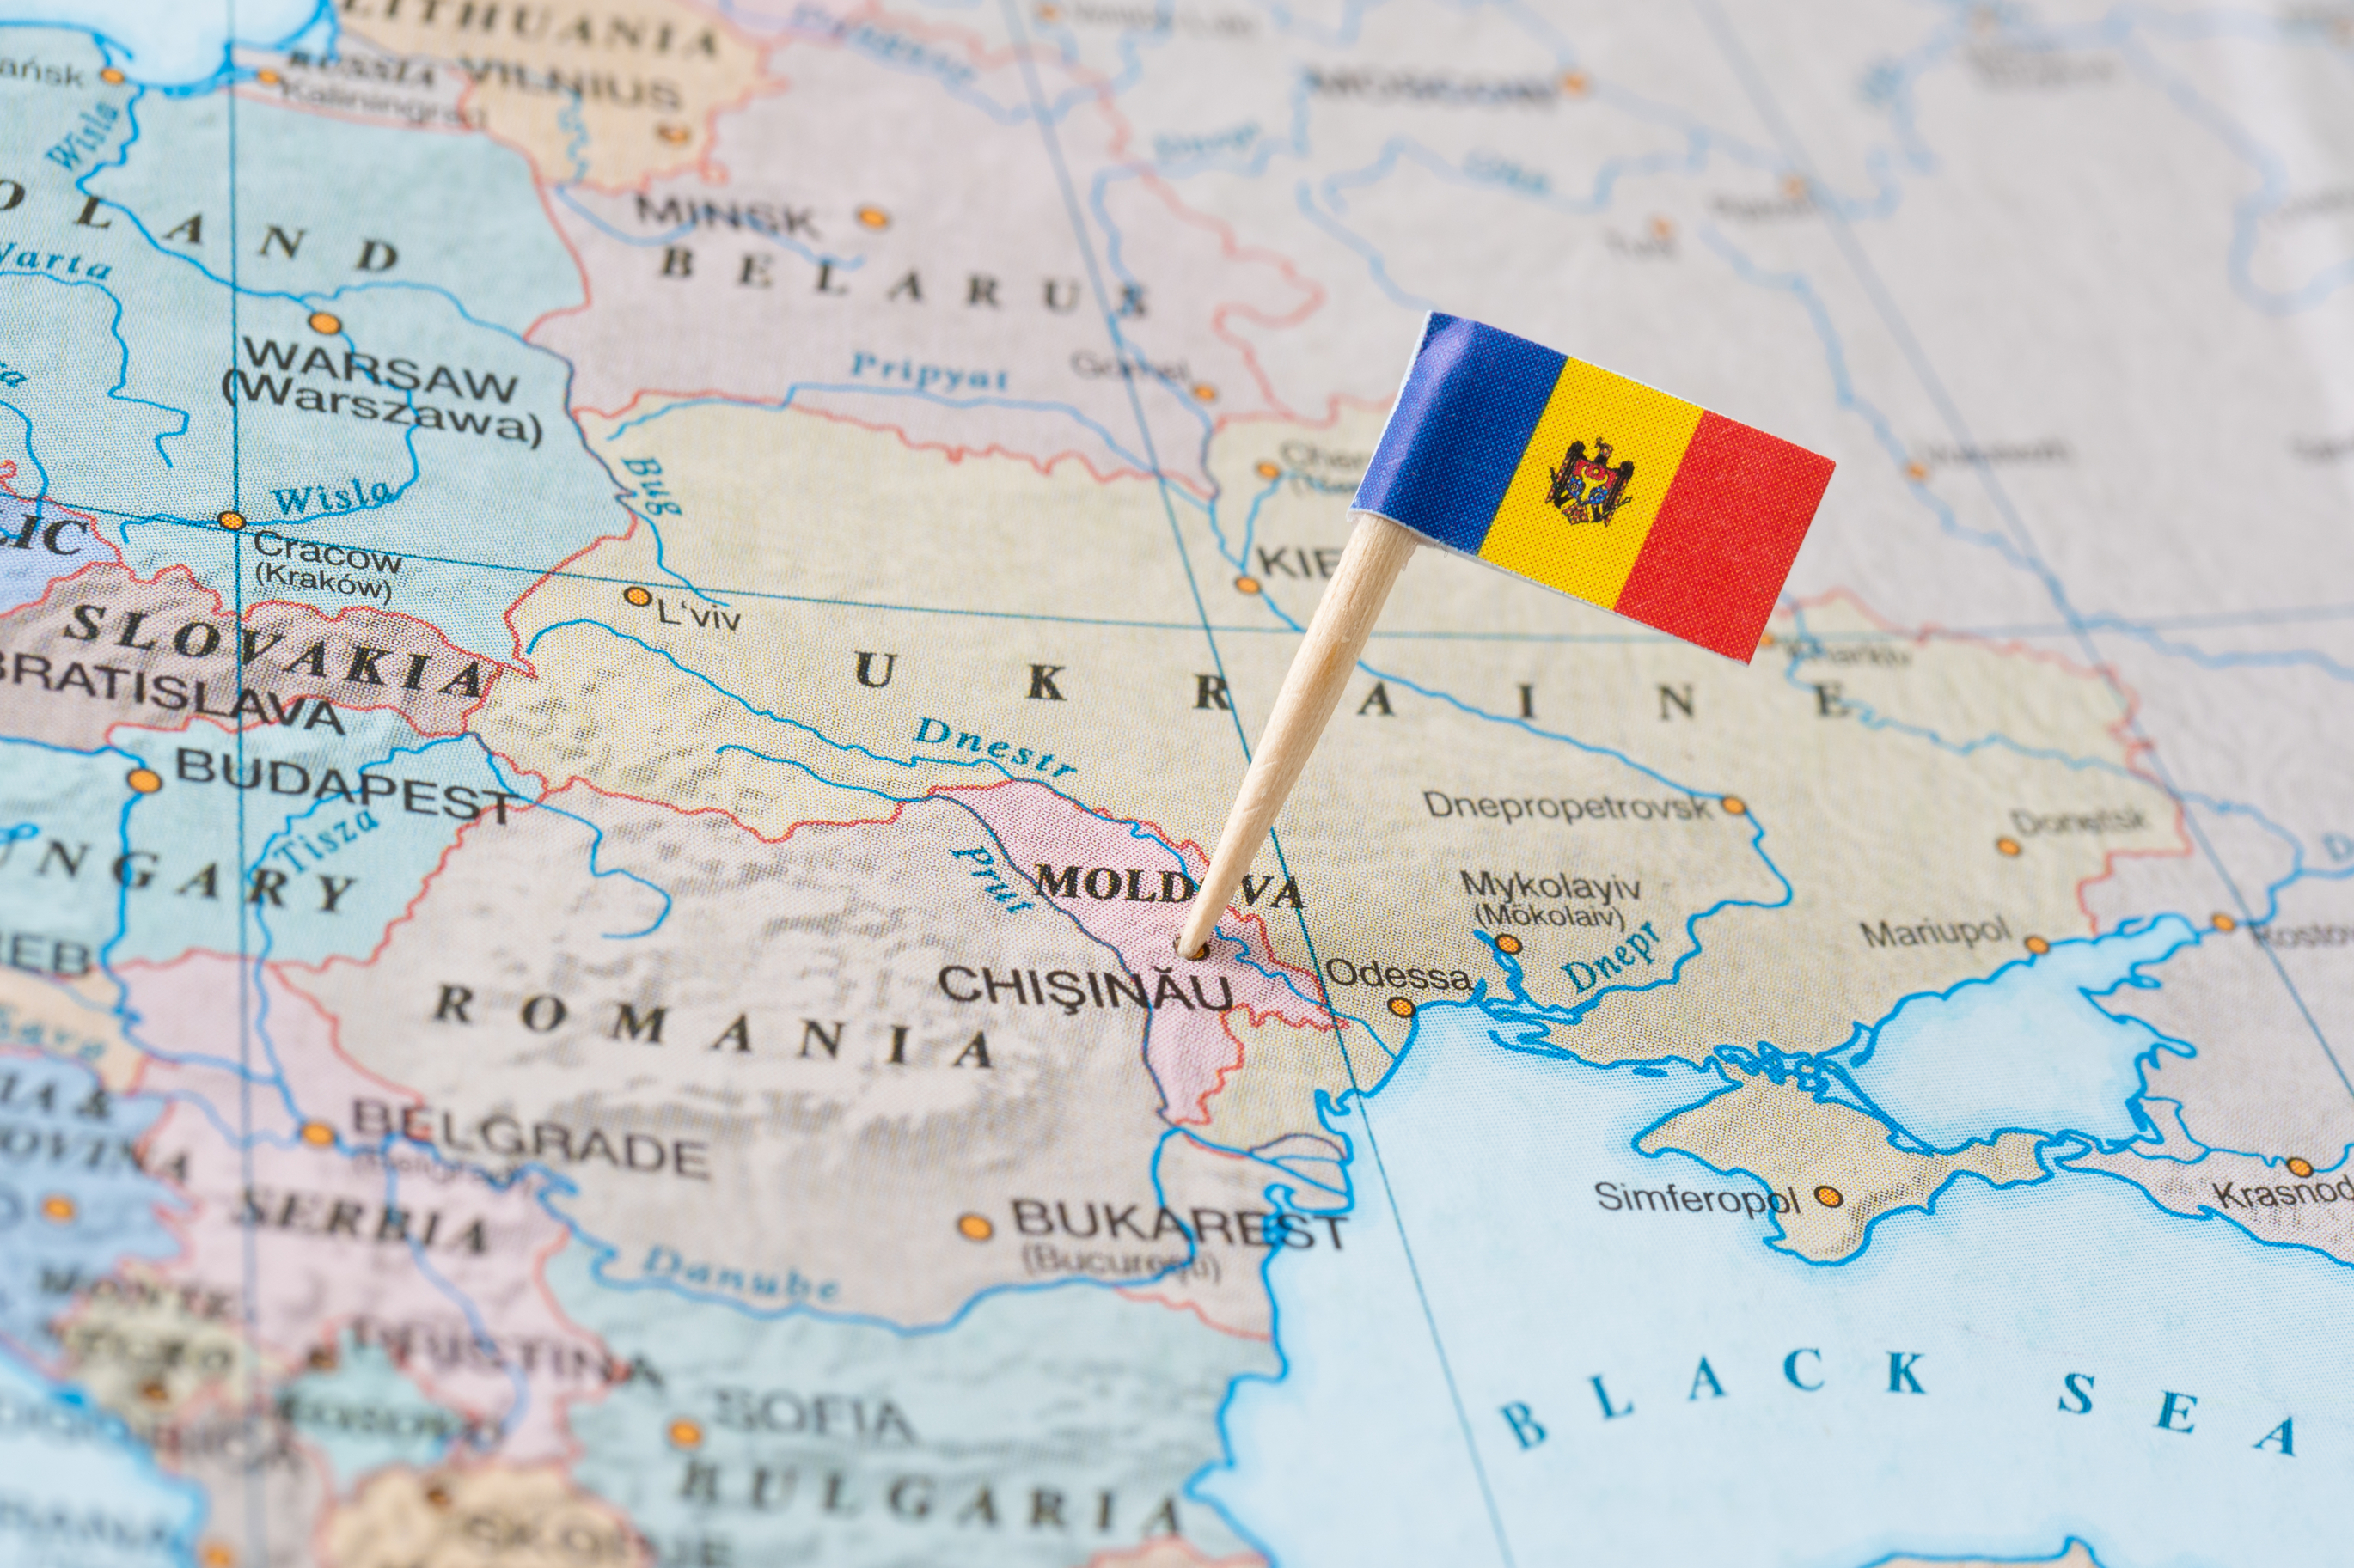 Applicants for free Romanian language courses in Moldova far exceed available spots